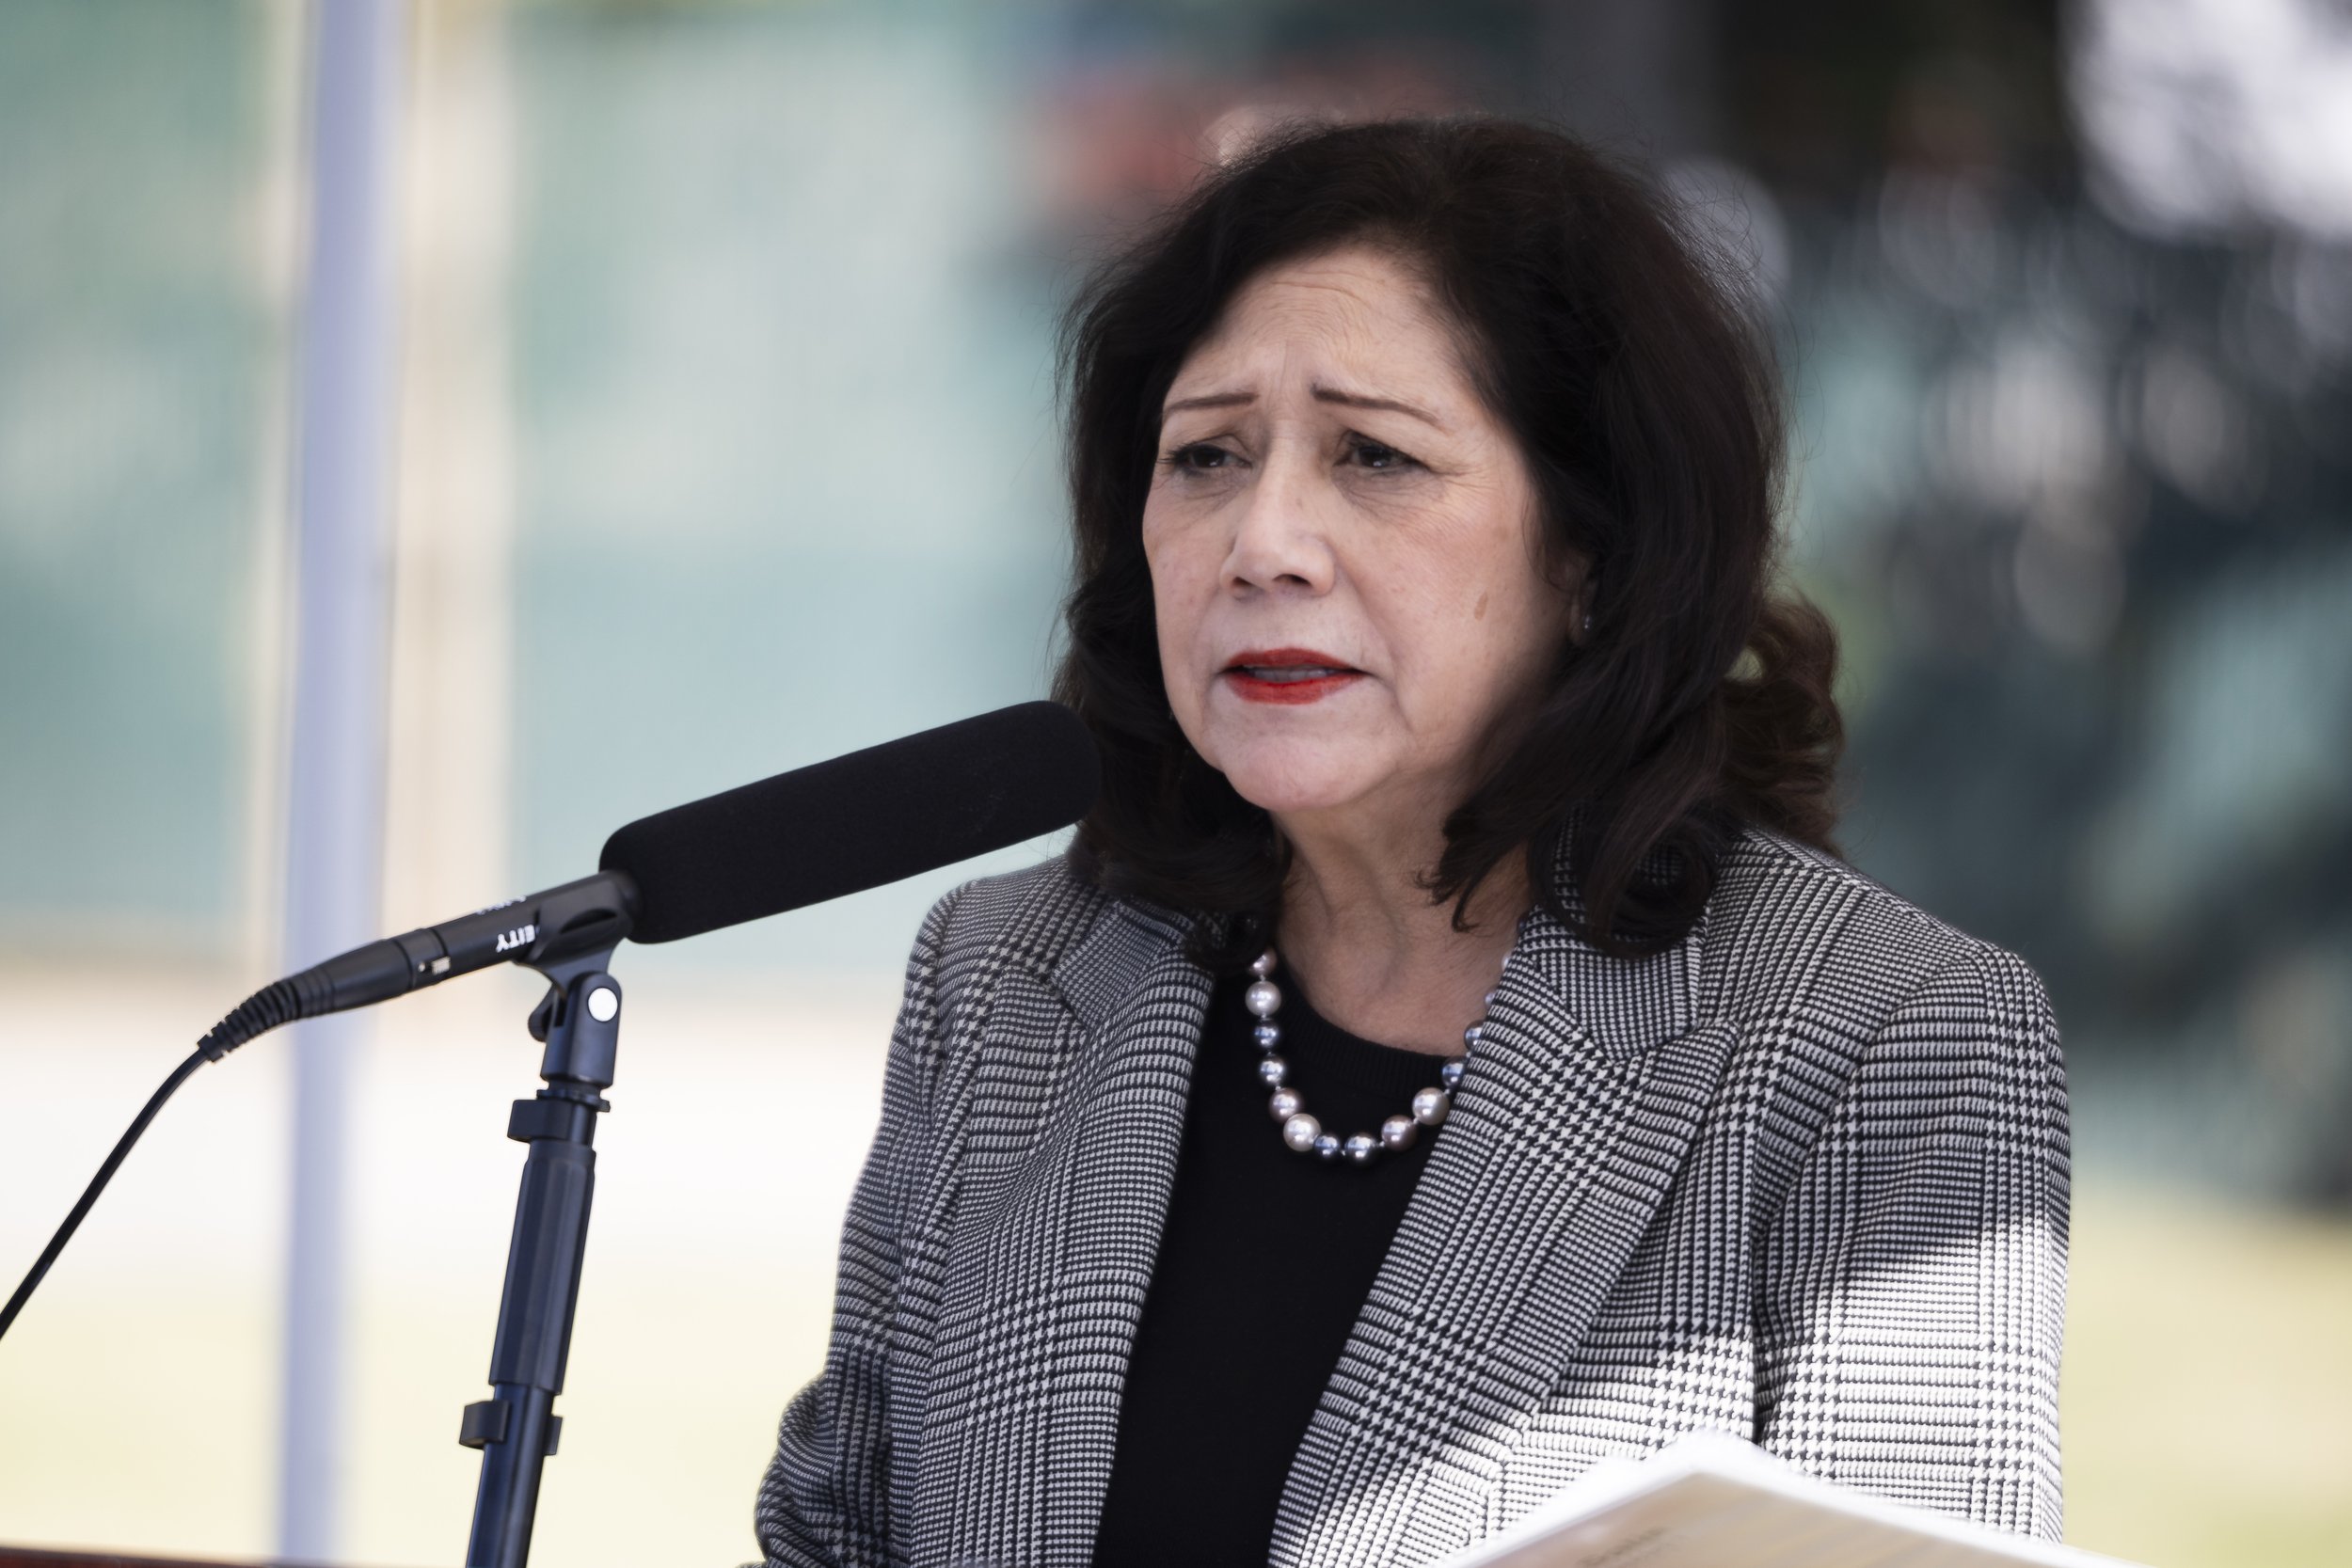  Los Angeles County Supervisor Hilda Solis (first district) speaks during the LA County Ceremony of the Unclaimed Dead at the LA County Cemetery, in Los Angeles, Calif., on Thursday, Dec. 14, 2023. The ceremony honored 1,937 individuals who died in 2